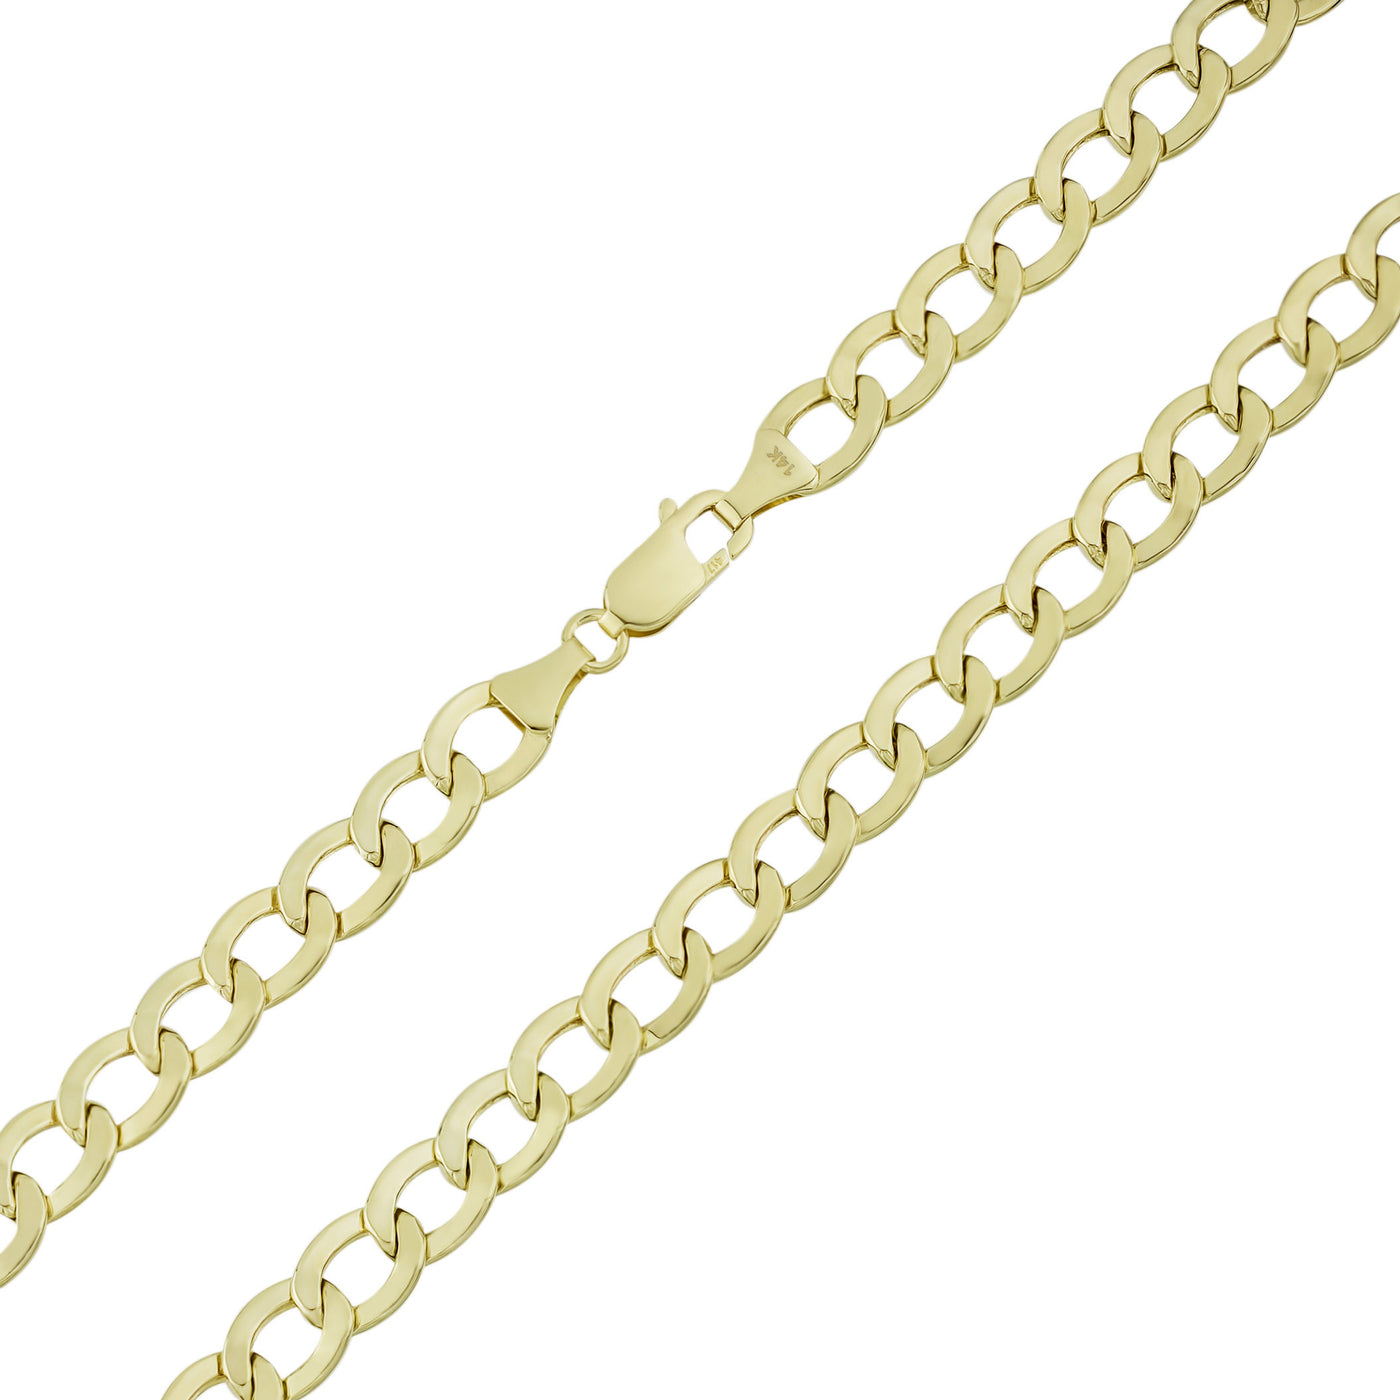 Women's Miami Curb Chain 14K Yellow Gold - Hollow